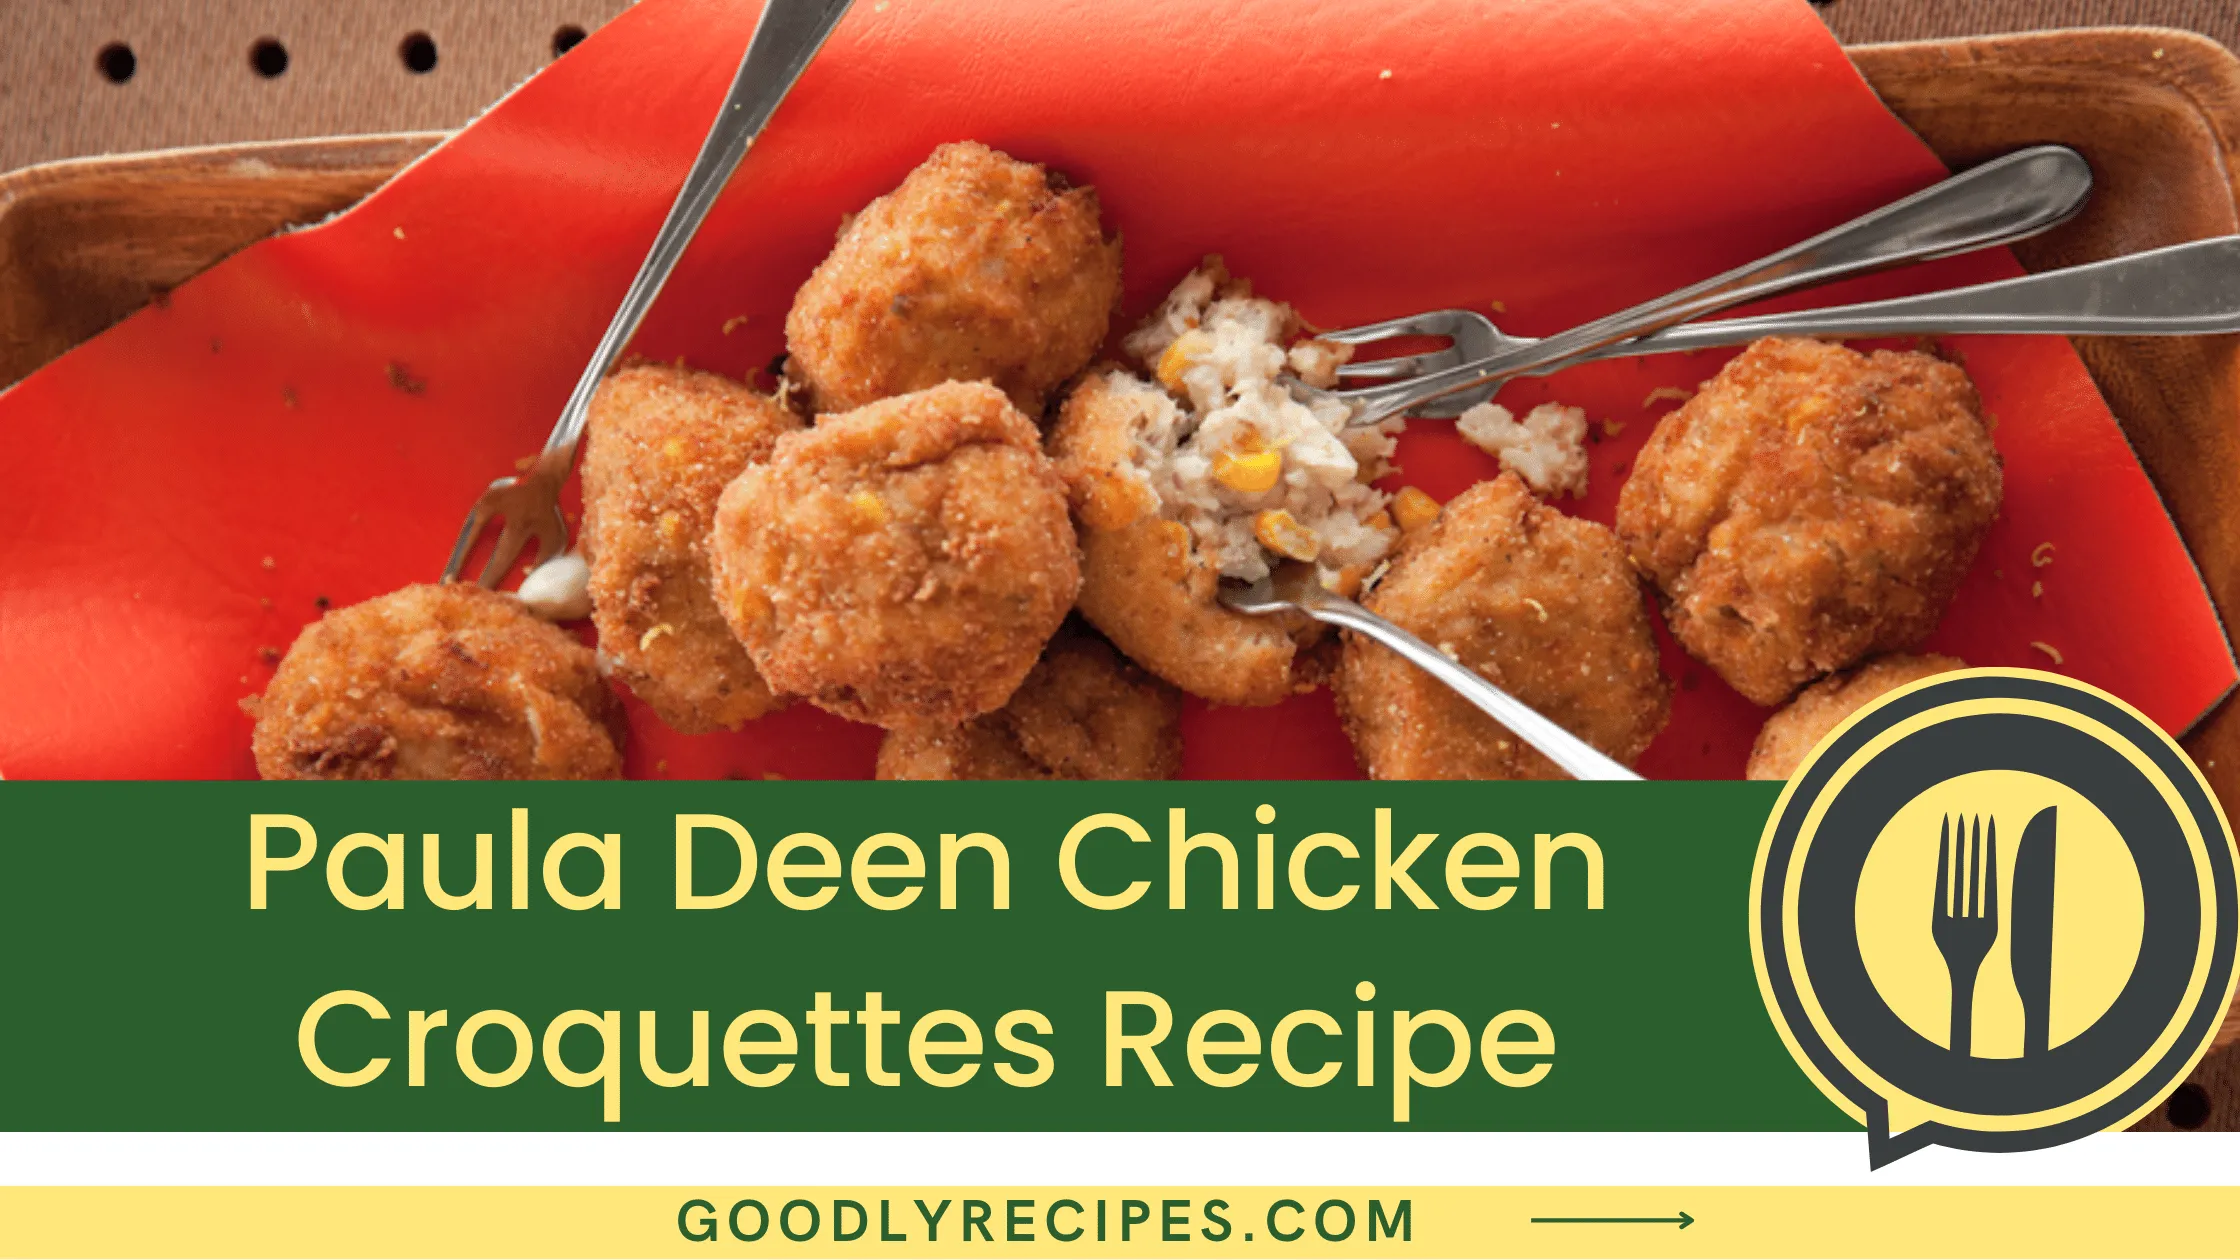 Paula Deen Chicken Croquettes Recipe - For Food Lovers